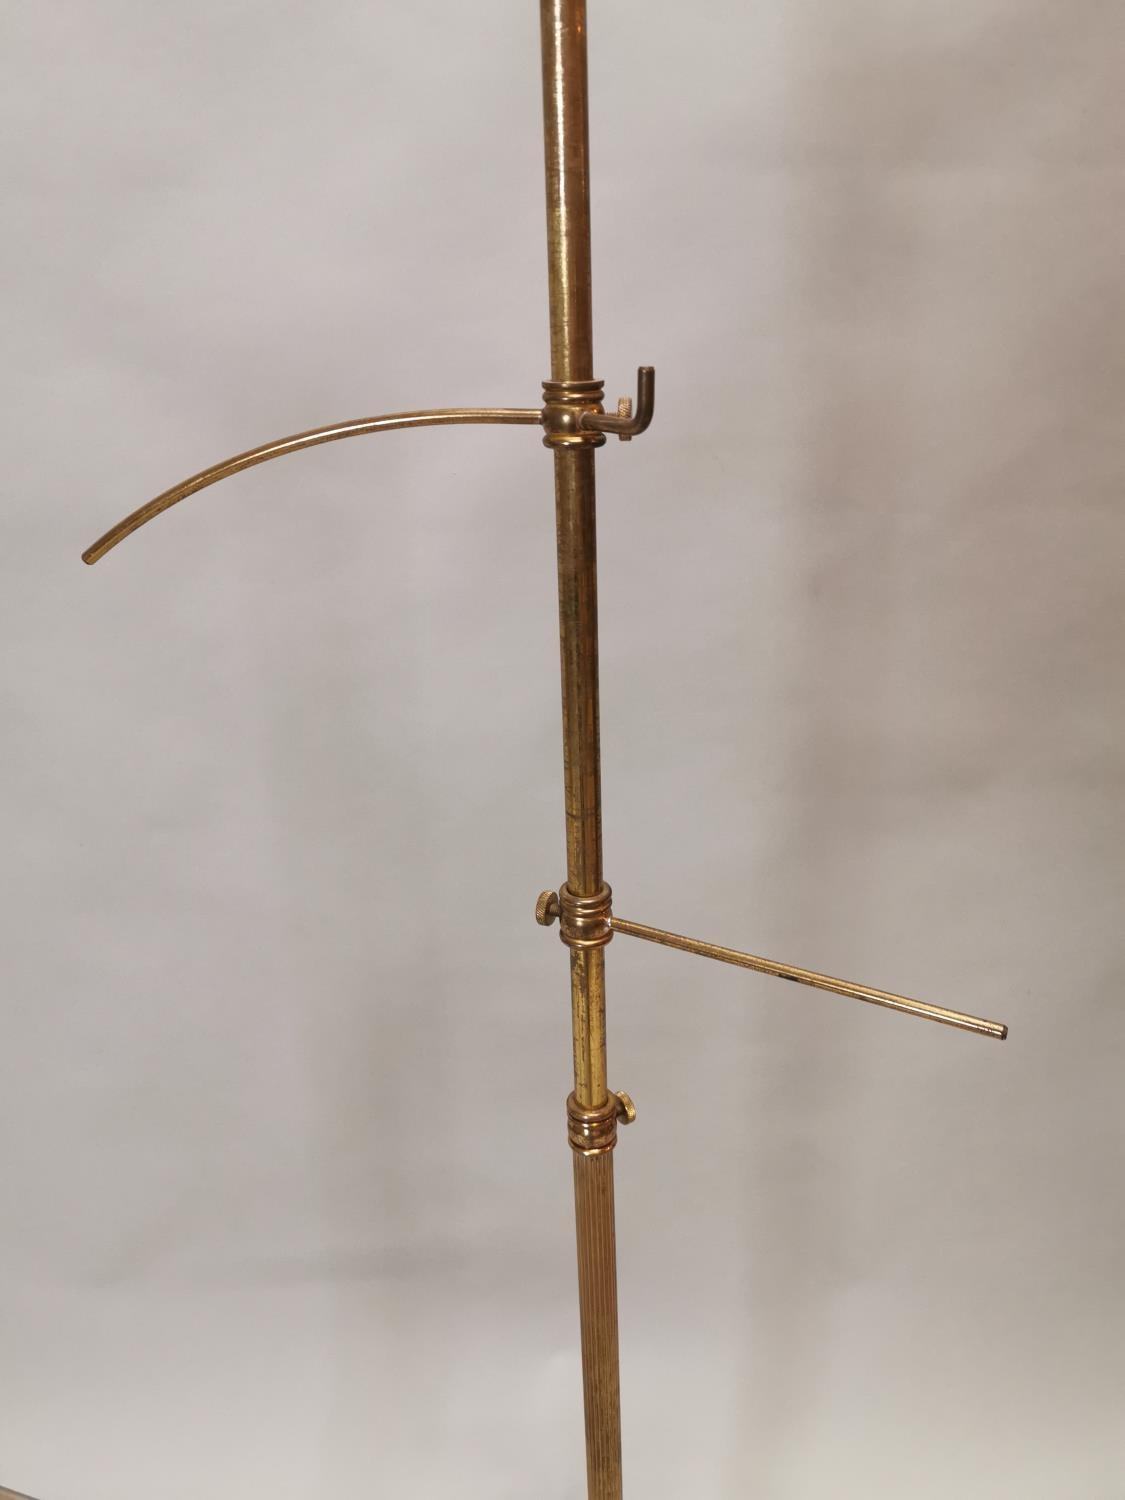 Two early 20th C. brass haberdashery shop hat stands - Image 3 of 8